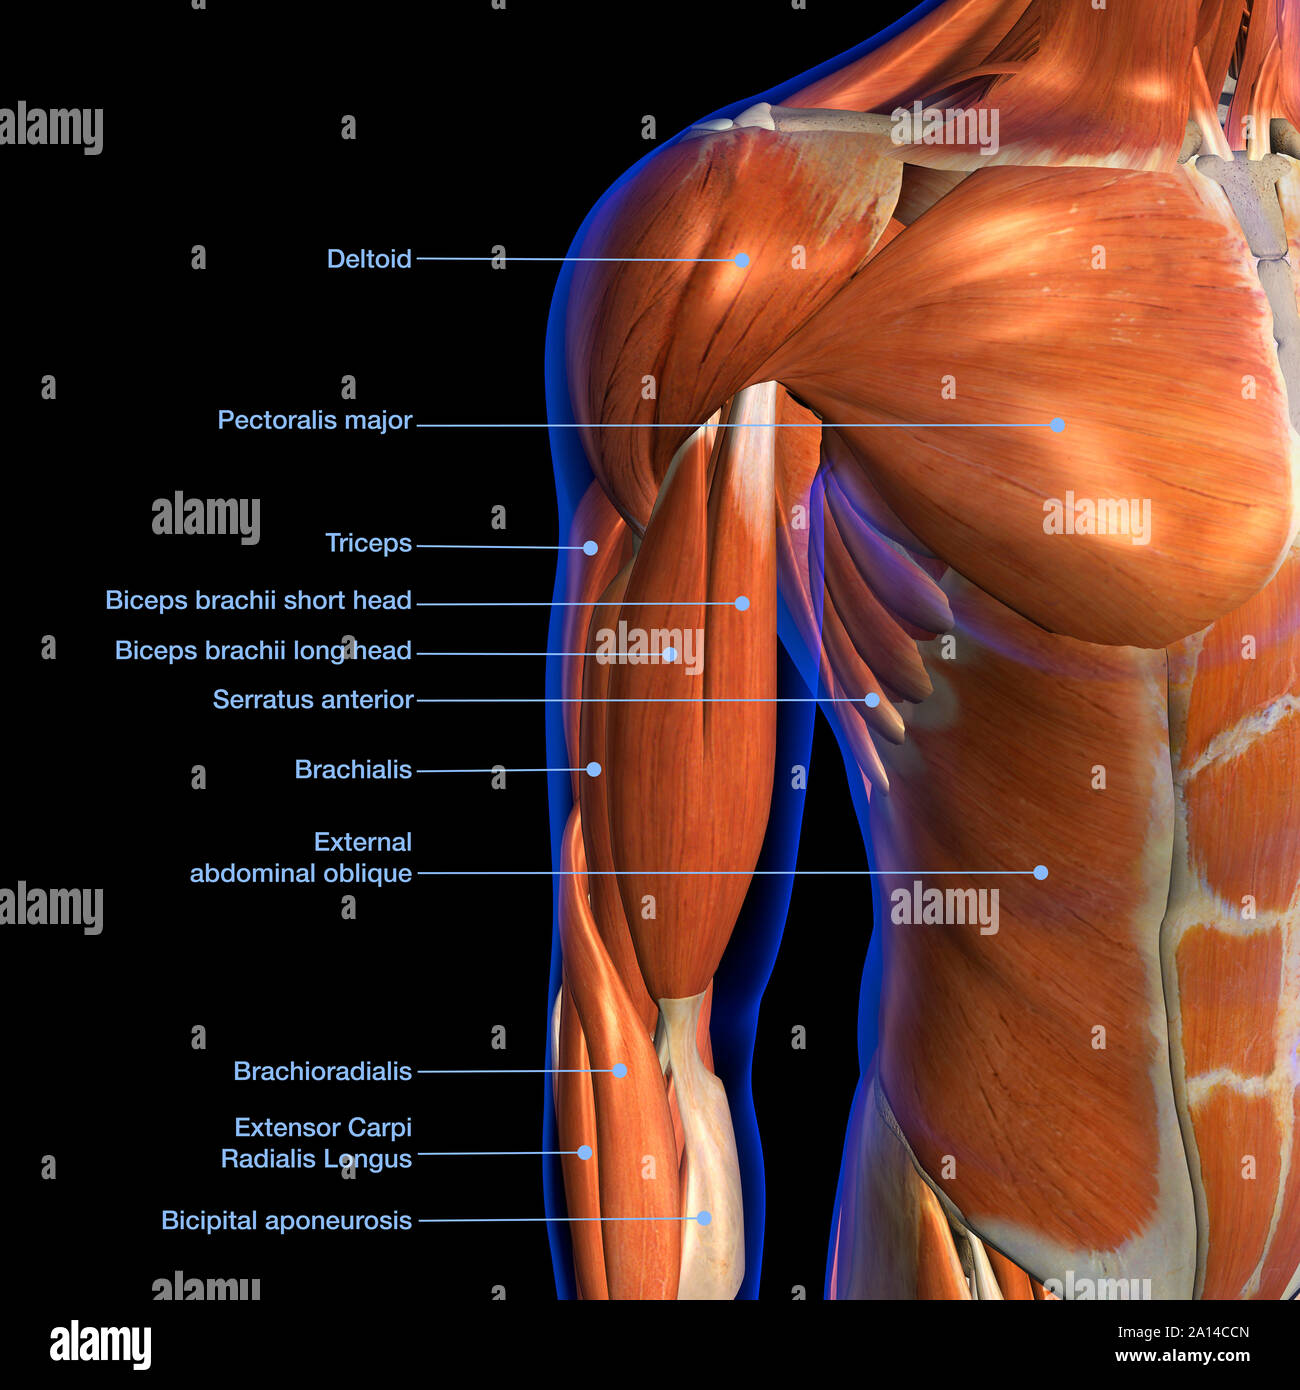 Labeled Anatomy Chart Of Male Biceps And Chest Muscle On Black